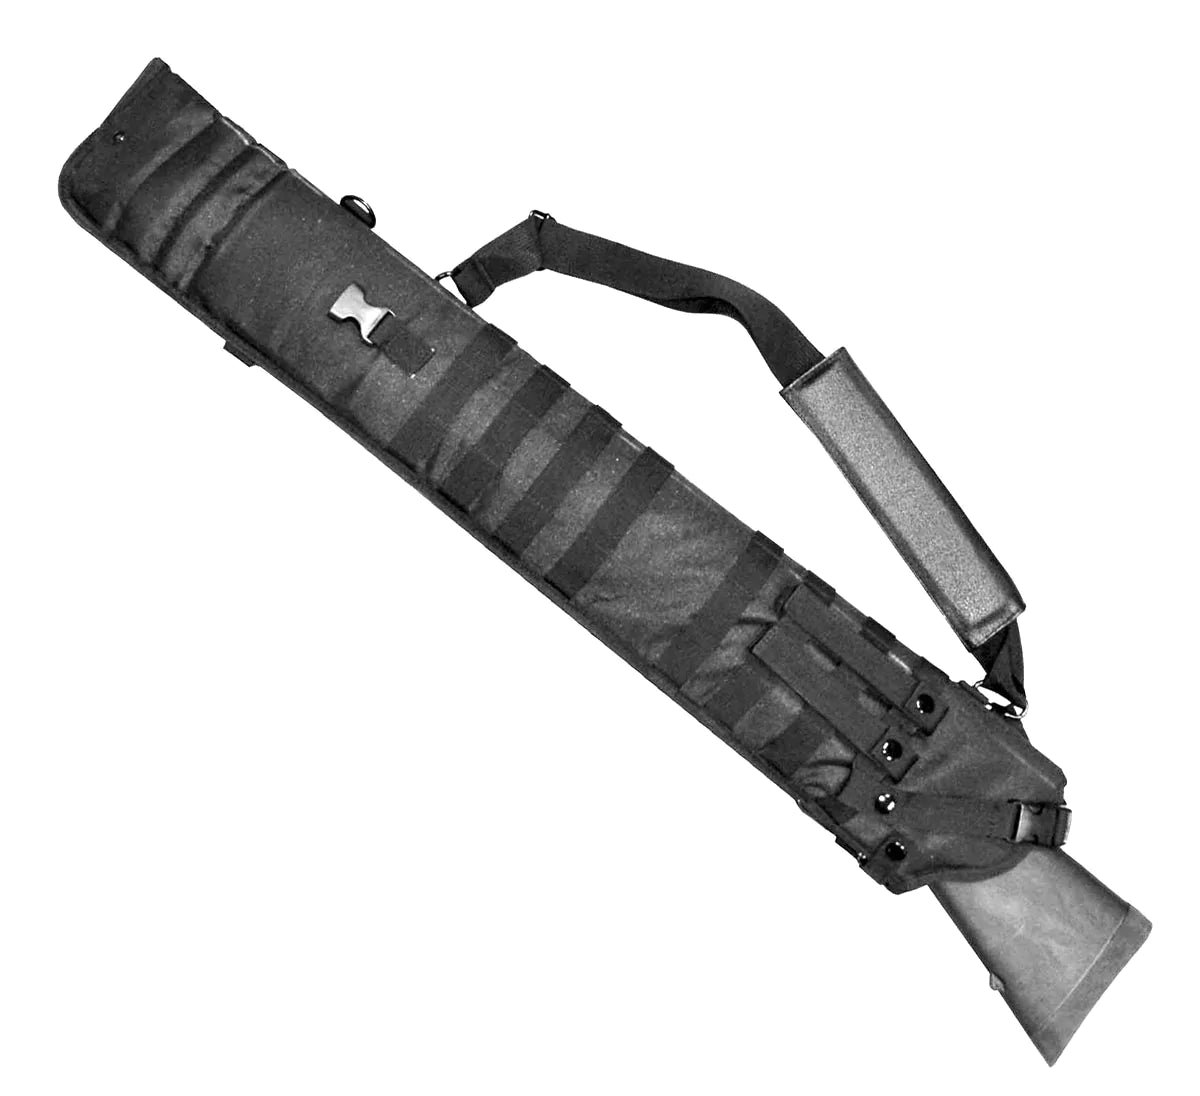 Remington 870 accessories case scabbard Black hunting gear bag horse atv tactical. - TRINITY SUPPLY INC